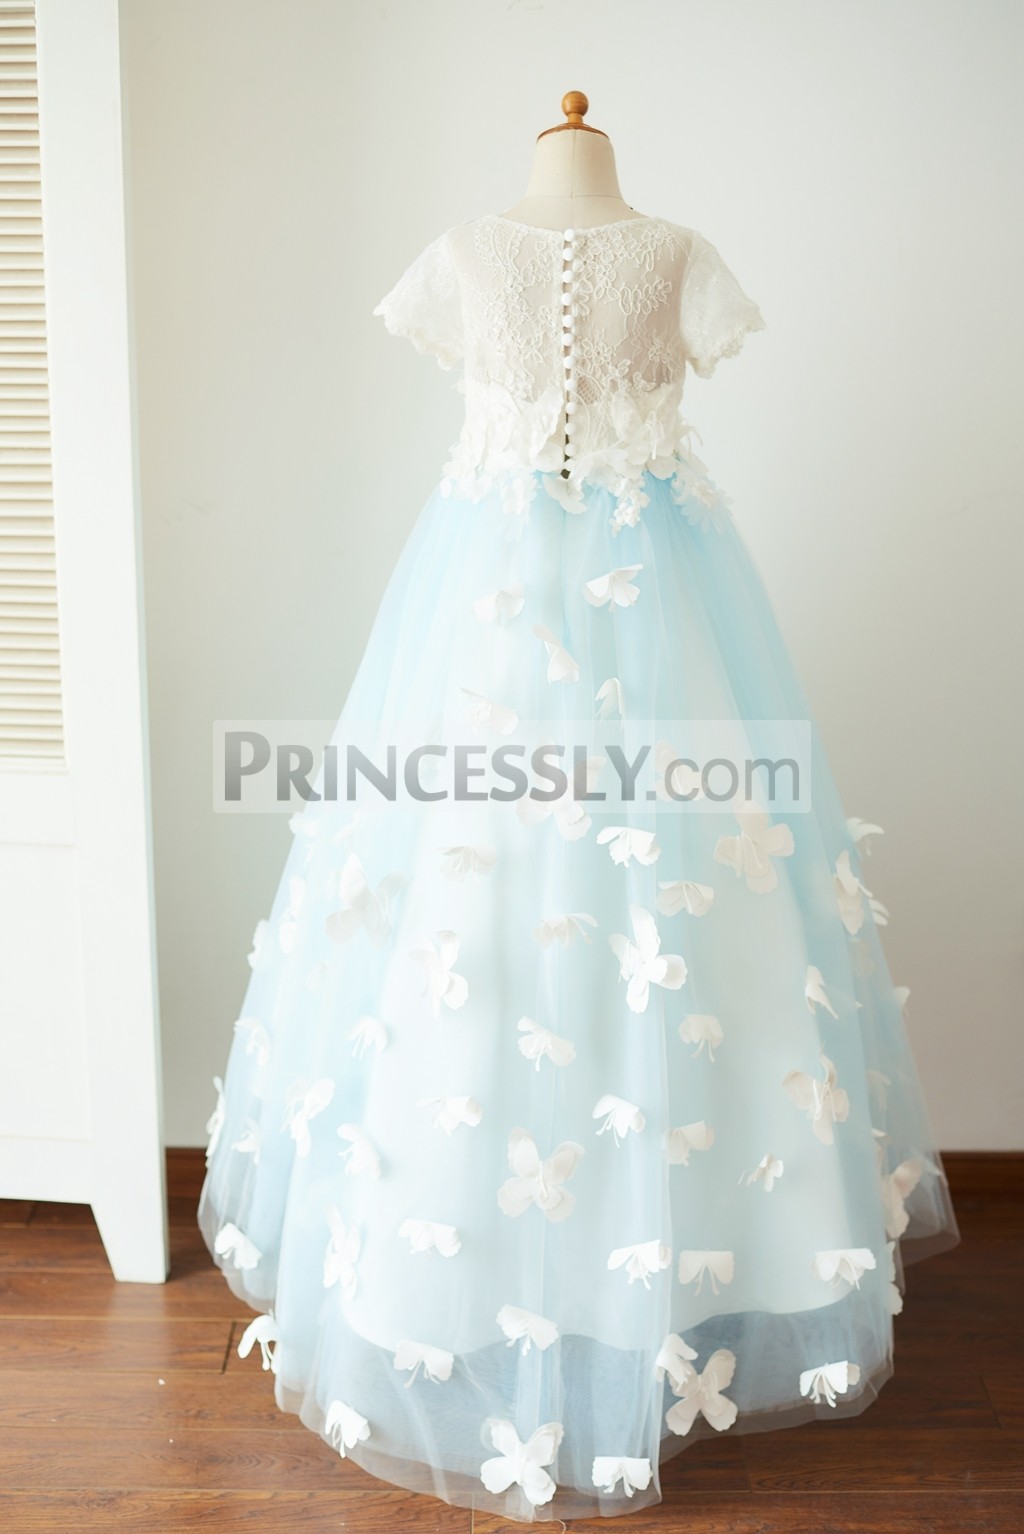 Sheer buttoned back lace tulle full length wedding flower girl gown 